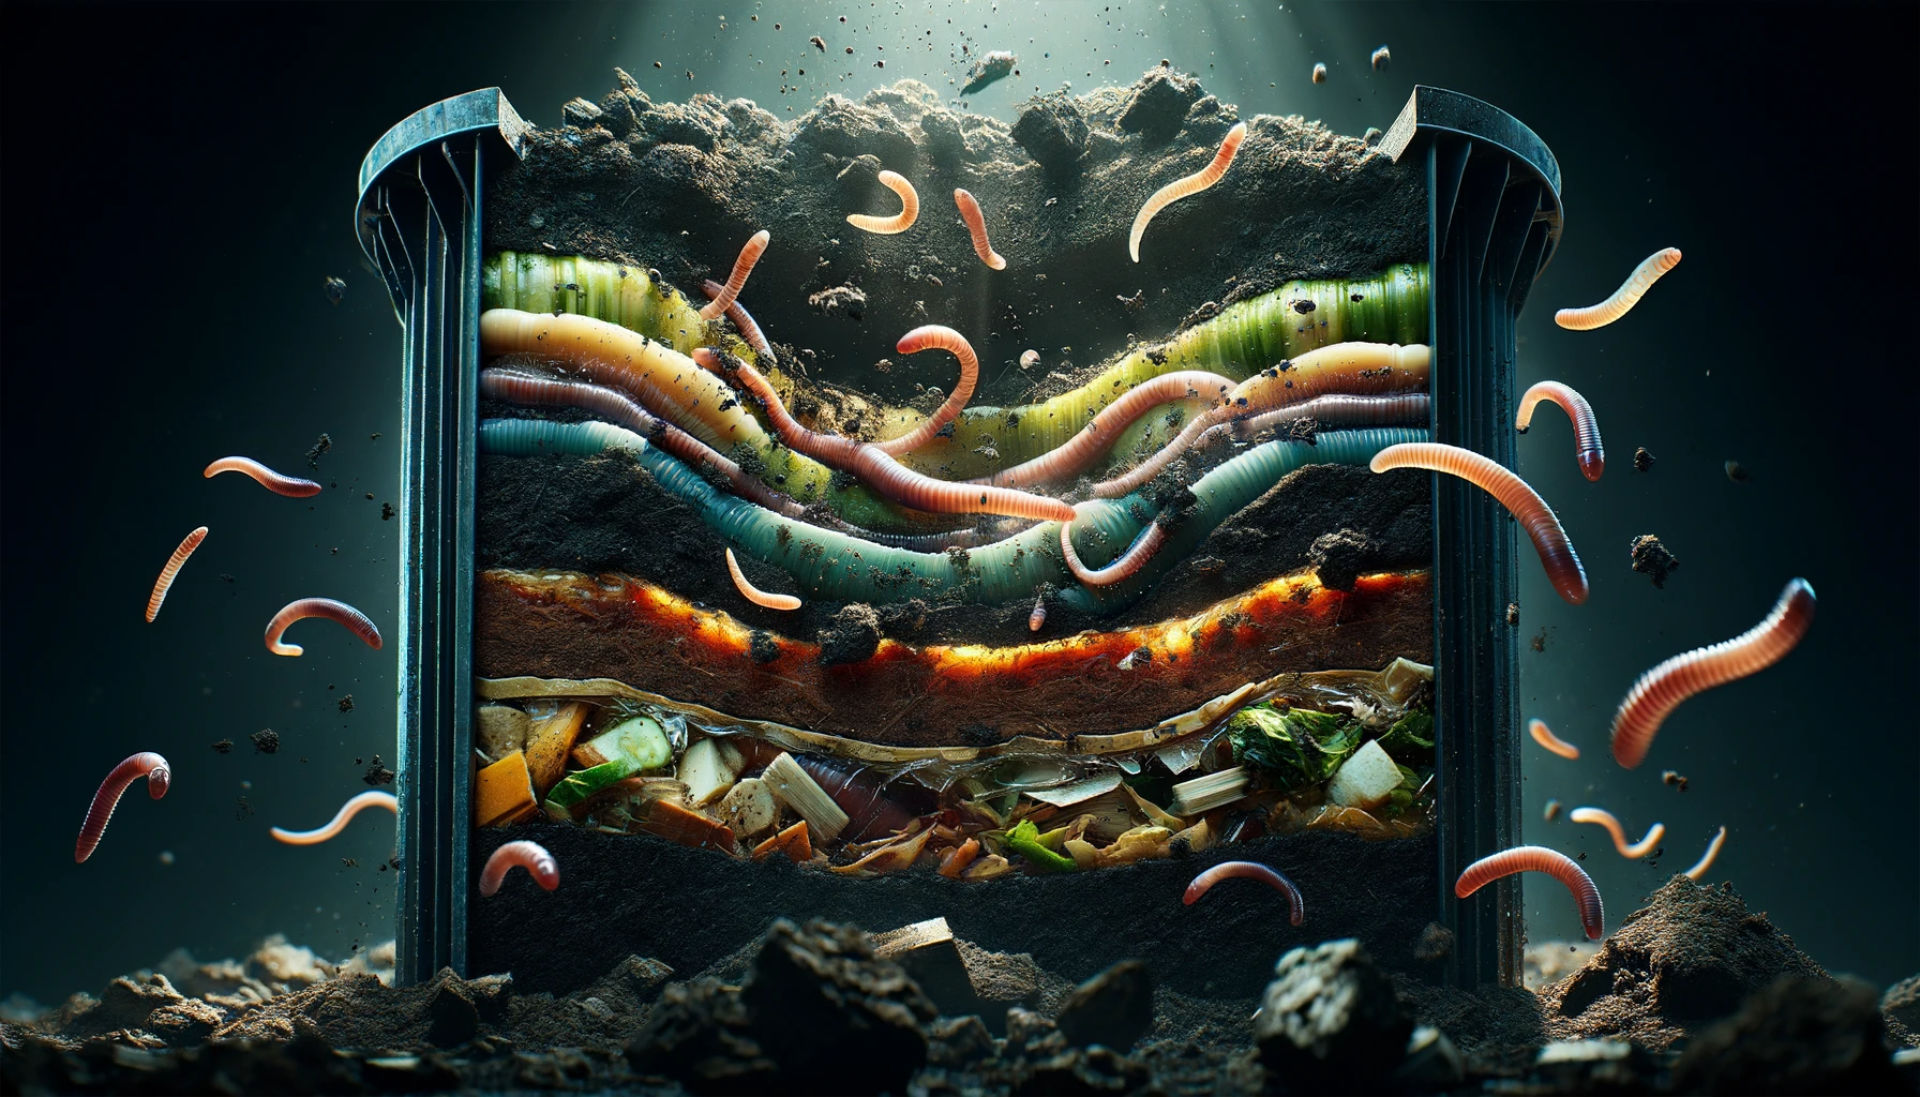 Worms: The Ultimate Recyclers: The fourth image captures a cross-section view of a vermicomposting bin, vividly depicting the layers within, including soil, organic waste, and worms actively recycling the materials.